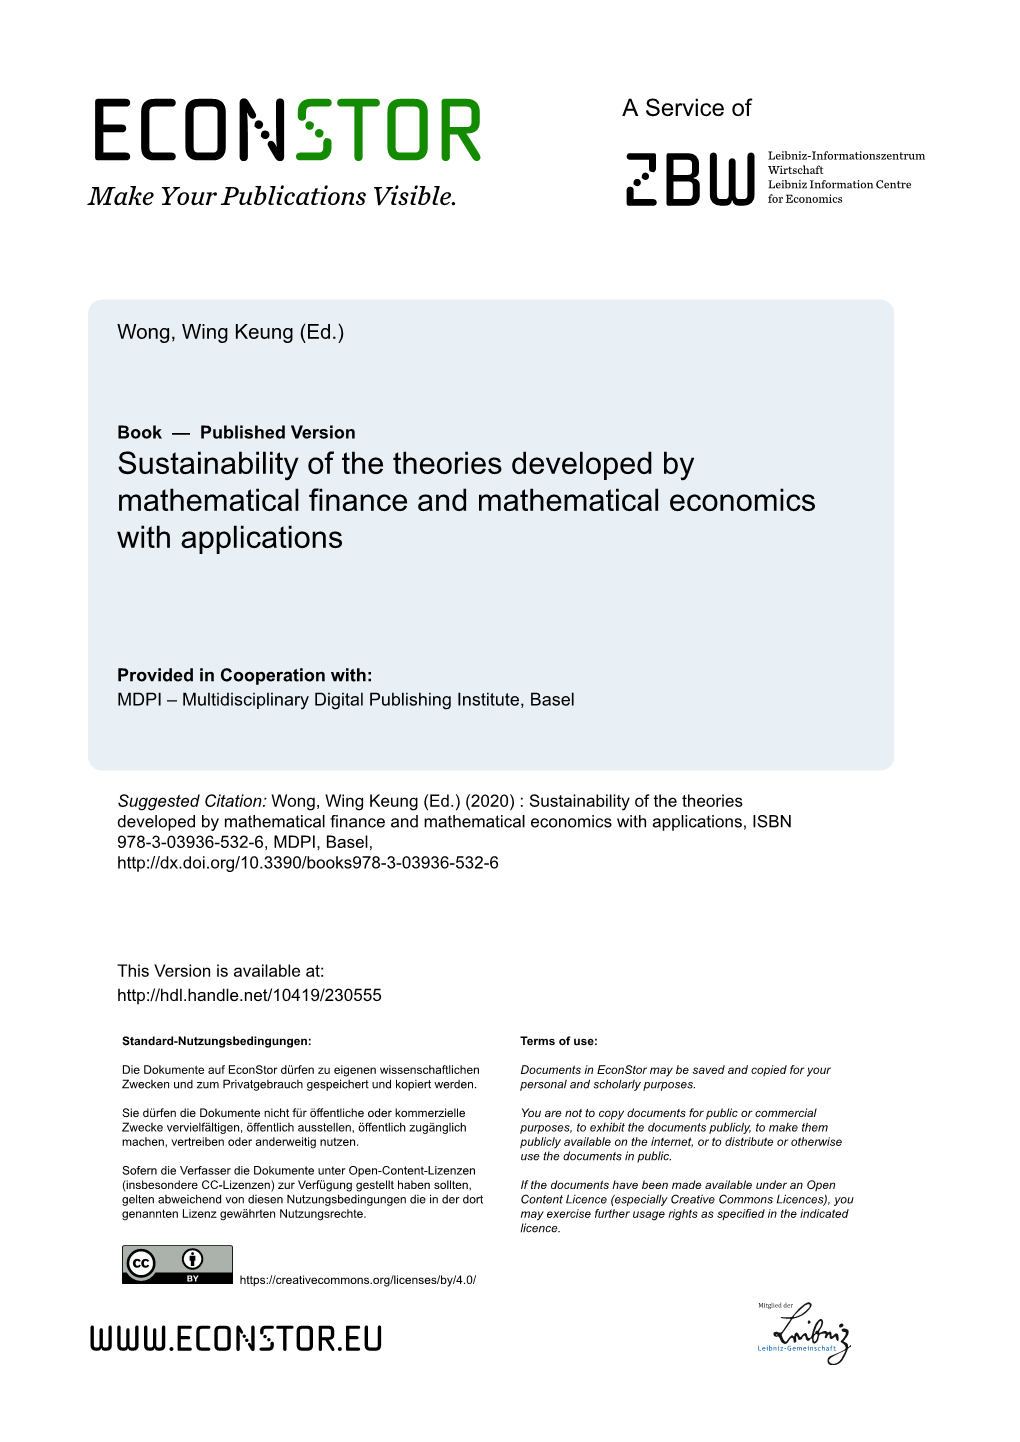 Sustainability of the Theories Developed by Mathematical Finance and Mathematical Economics with Applications